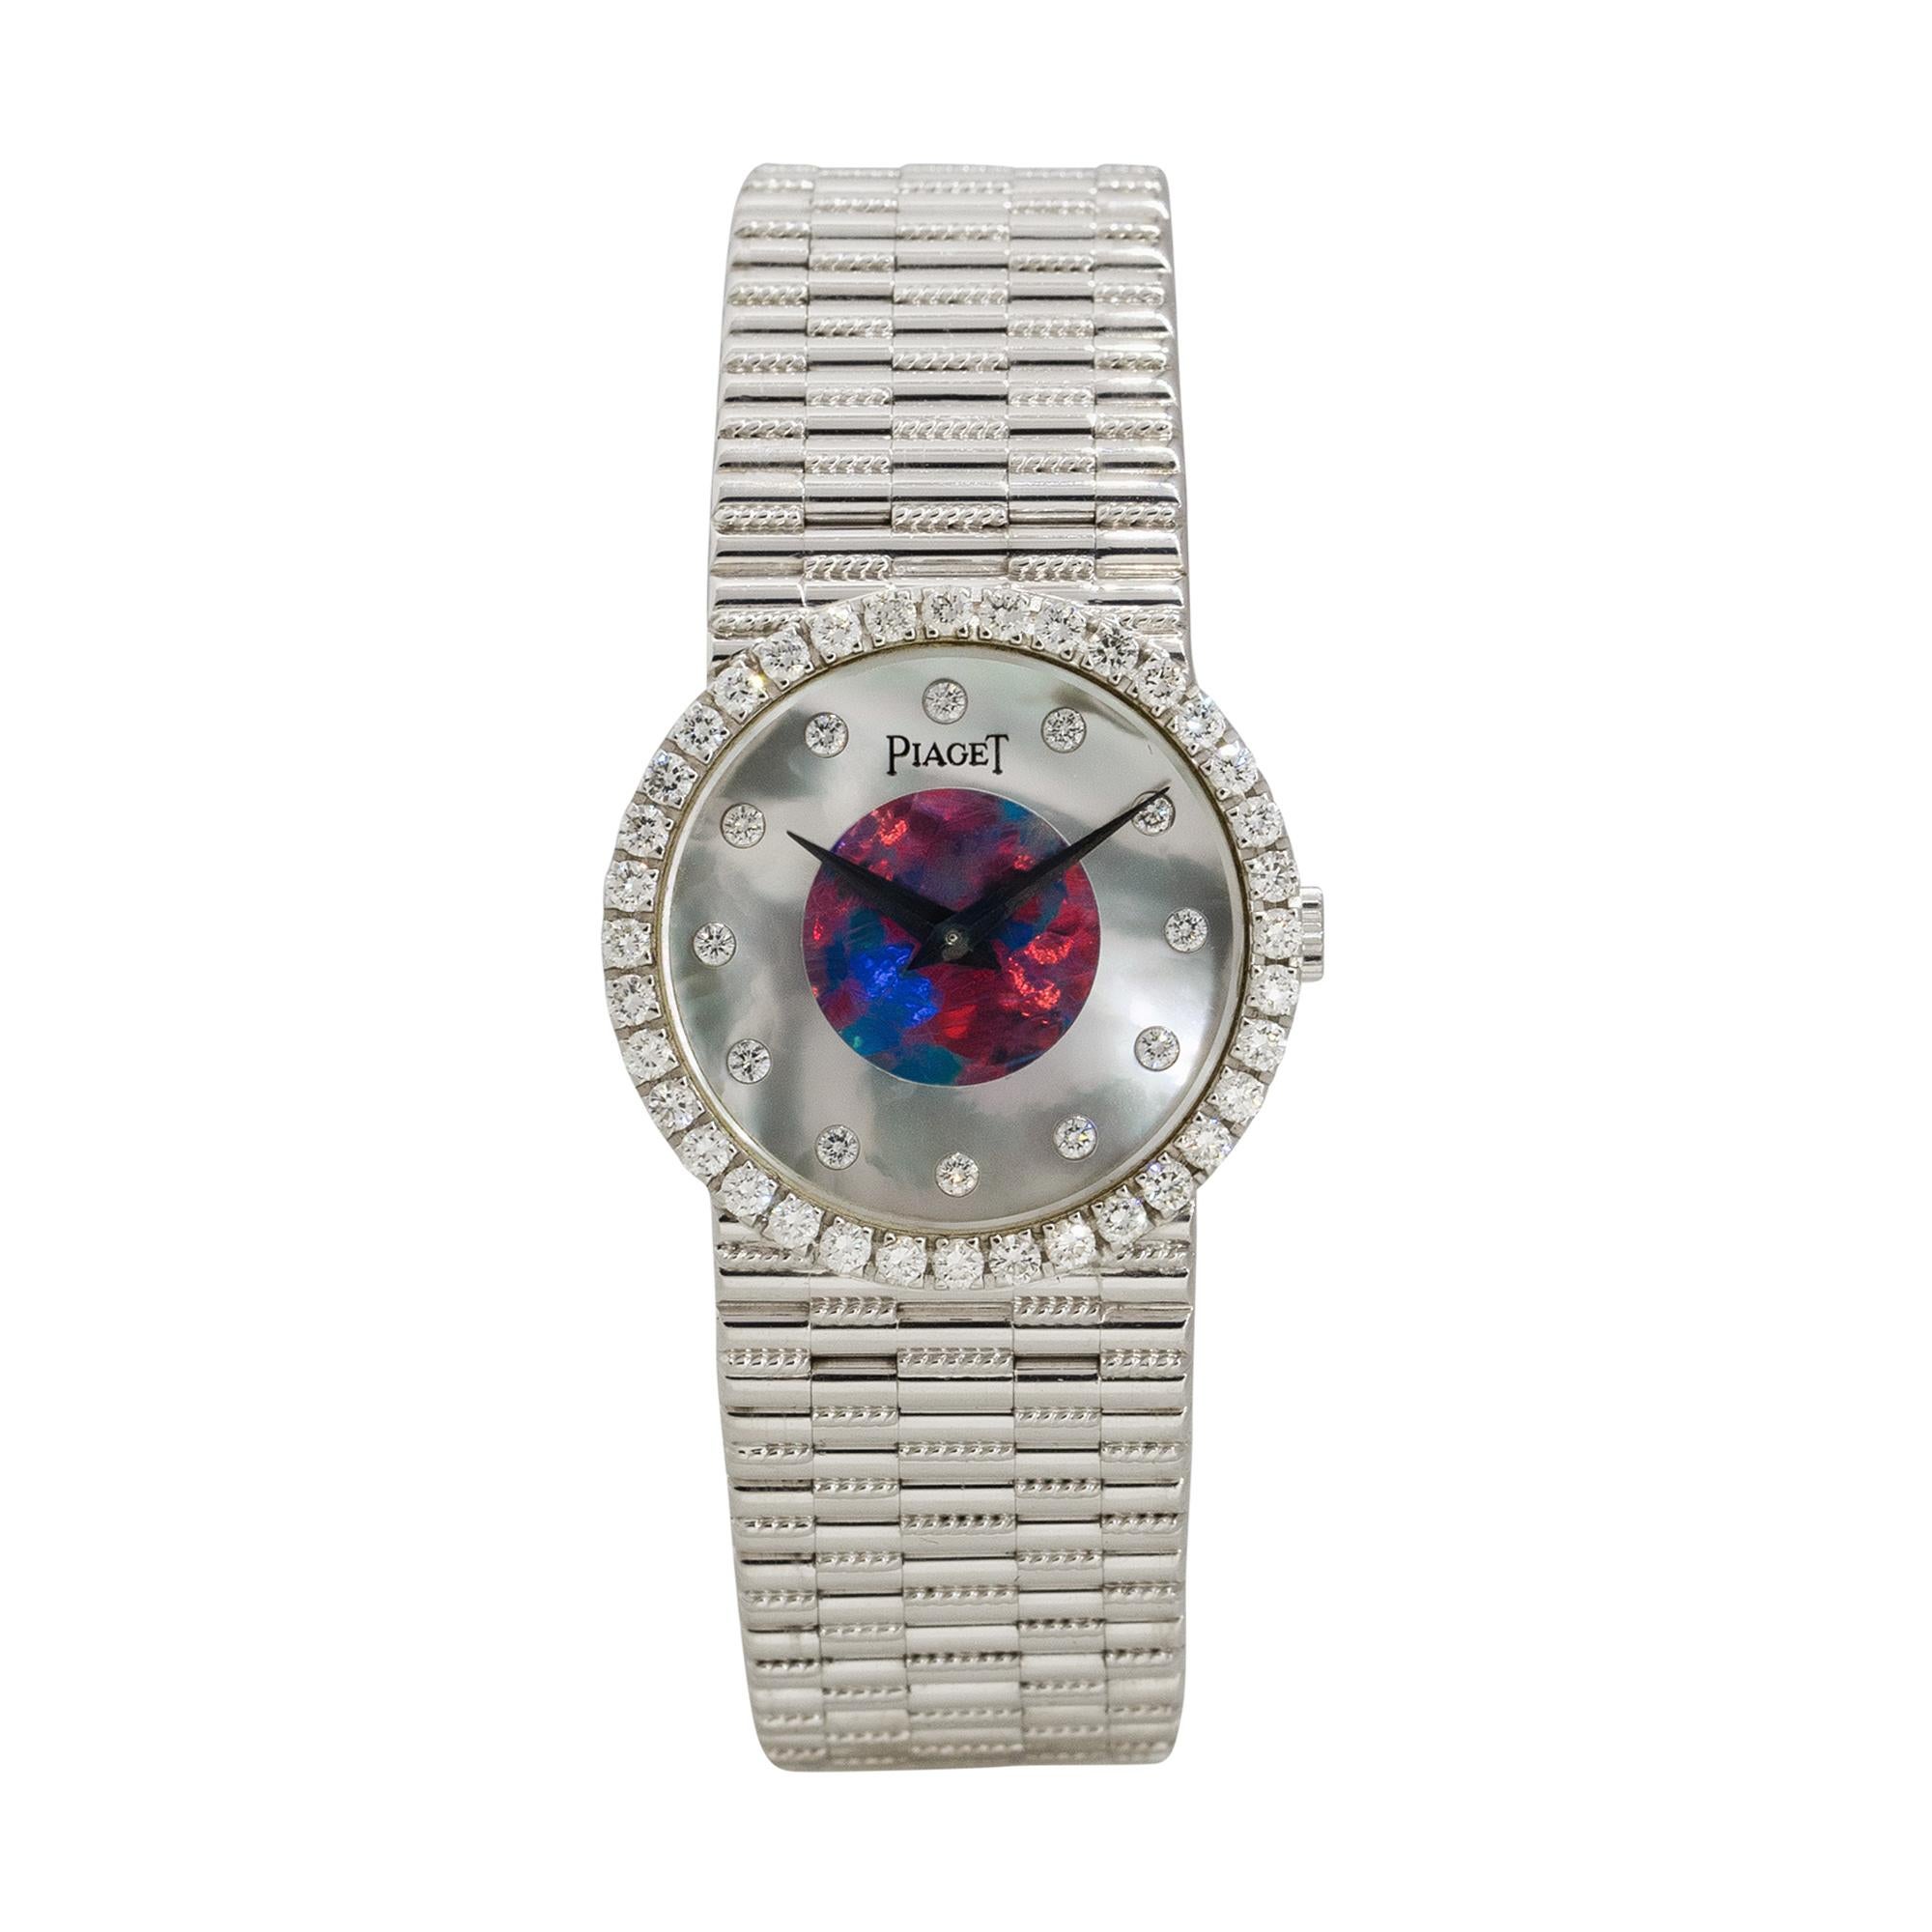 Brand: Piaget
Case Material: 18k White Gold
Case Diameter: 24mm
Crystal: Sapphire Crystal
Bezel: 18k White Gold bezel with Diamonds
Dial: Mother of Pearl, Opal dial with white gold hands and Diamond markers
Bracelet: 18k White Gold
Size: Will fit a